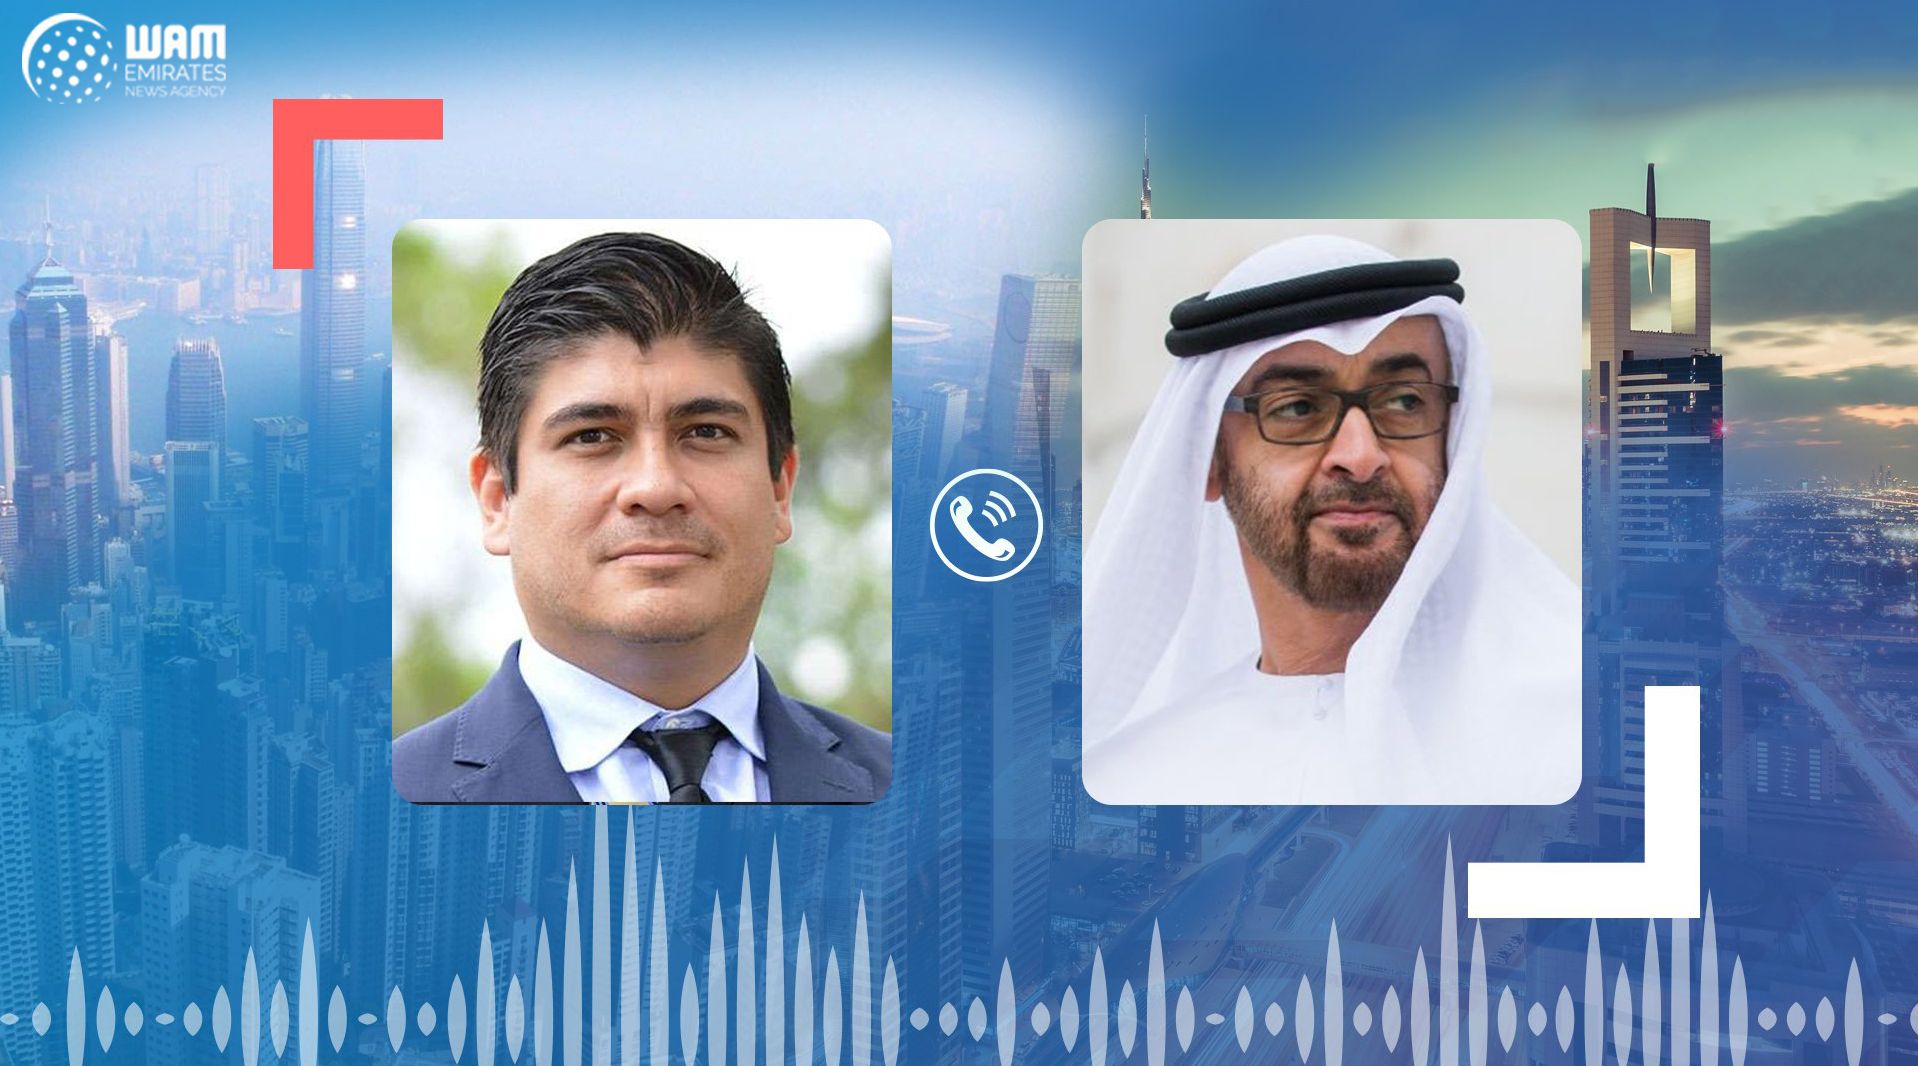 Sheikh Mohamed bin Zayed Al Nahyan, Crown Prince of Abu Dhabi and Deputy Supreme Commander of the UAE Armed Forces, and Costa Rica's President Carlos Alvarado Quesada on Wednesday held a telephonic conversation